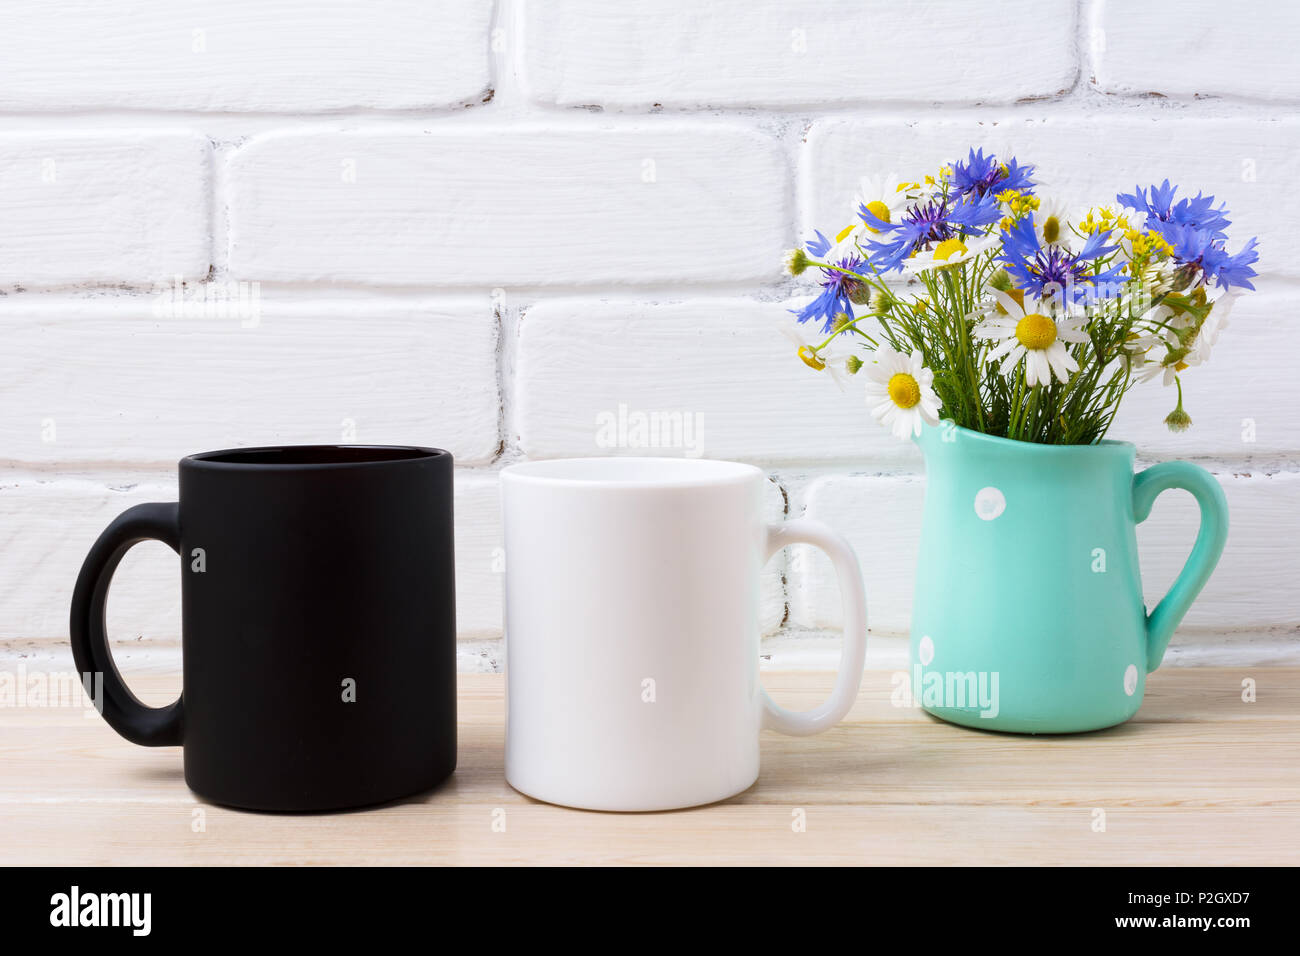 White and black coffe mug mockup with cornflower and daisy in the rustic pitcher vase.  Empty mug mock up for design promotion. Stock Photo